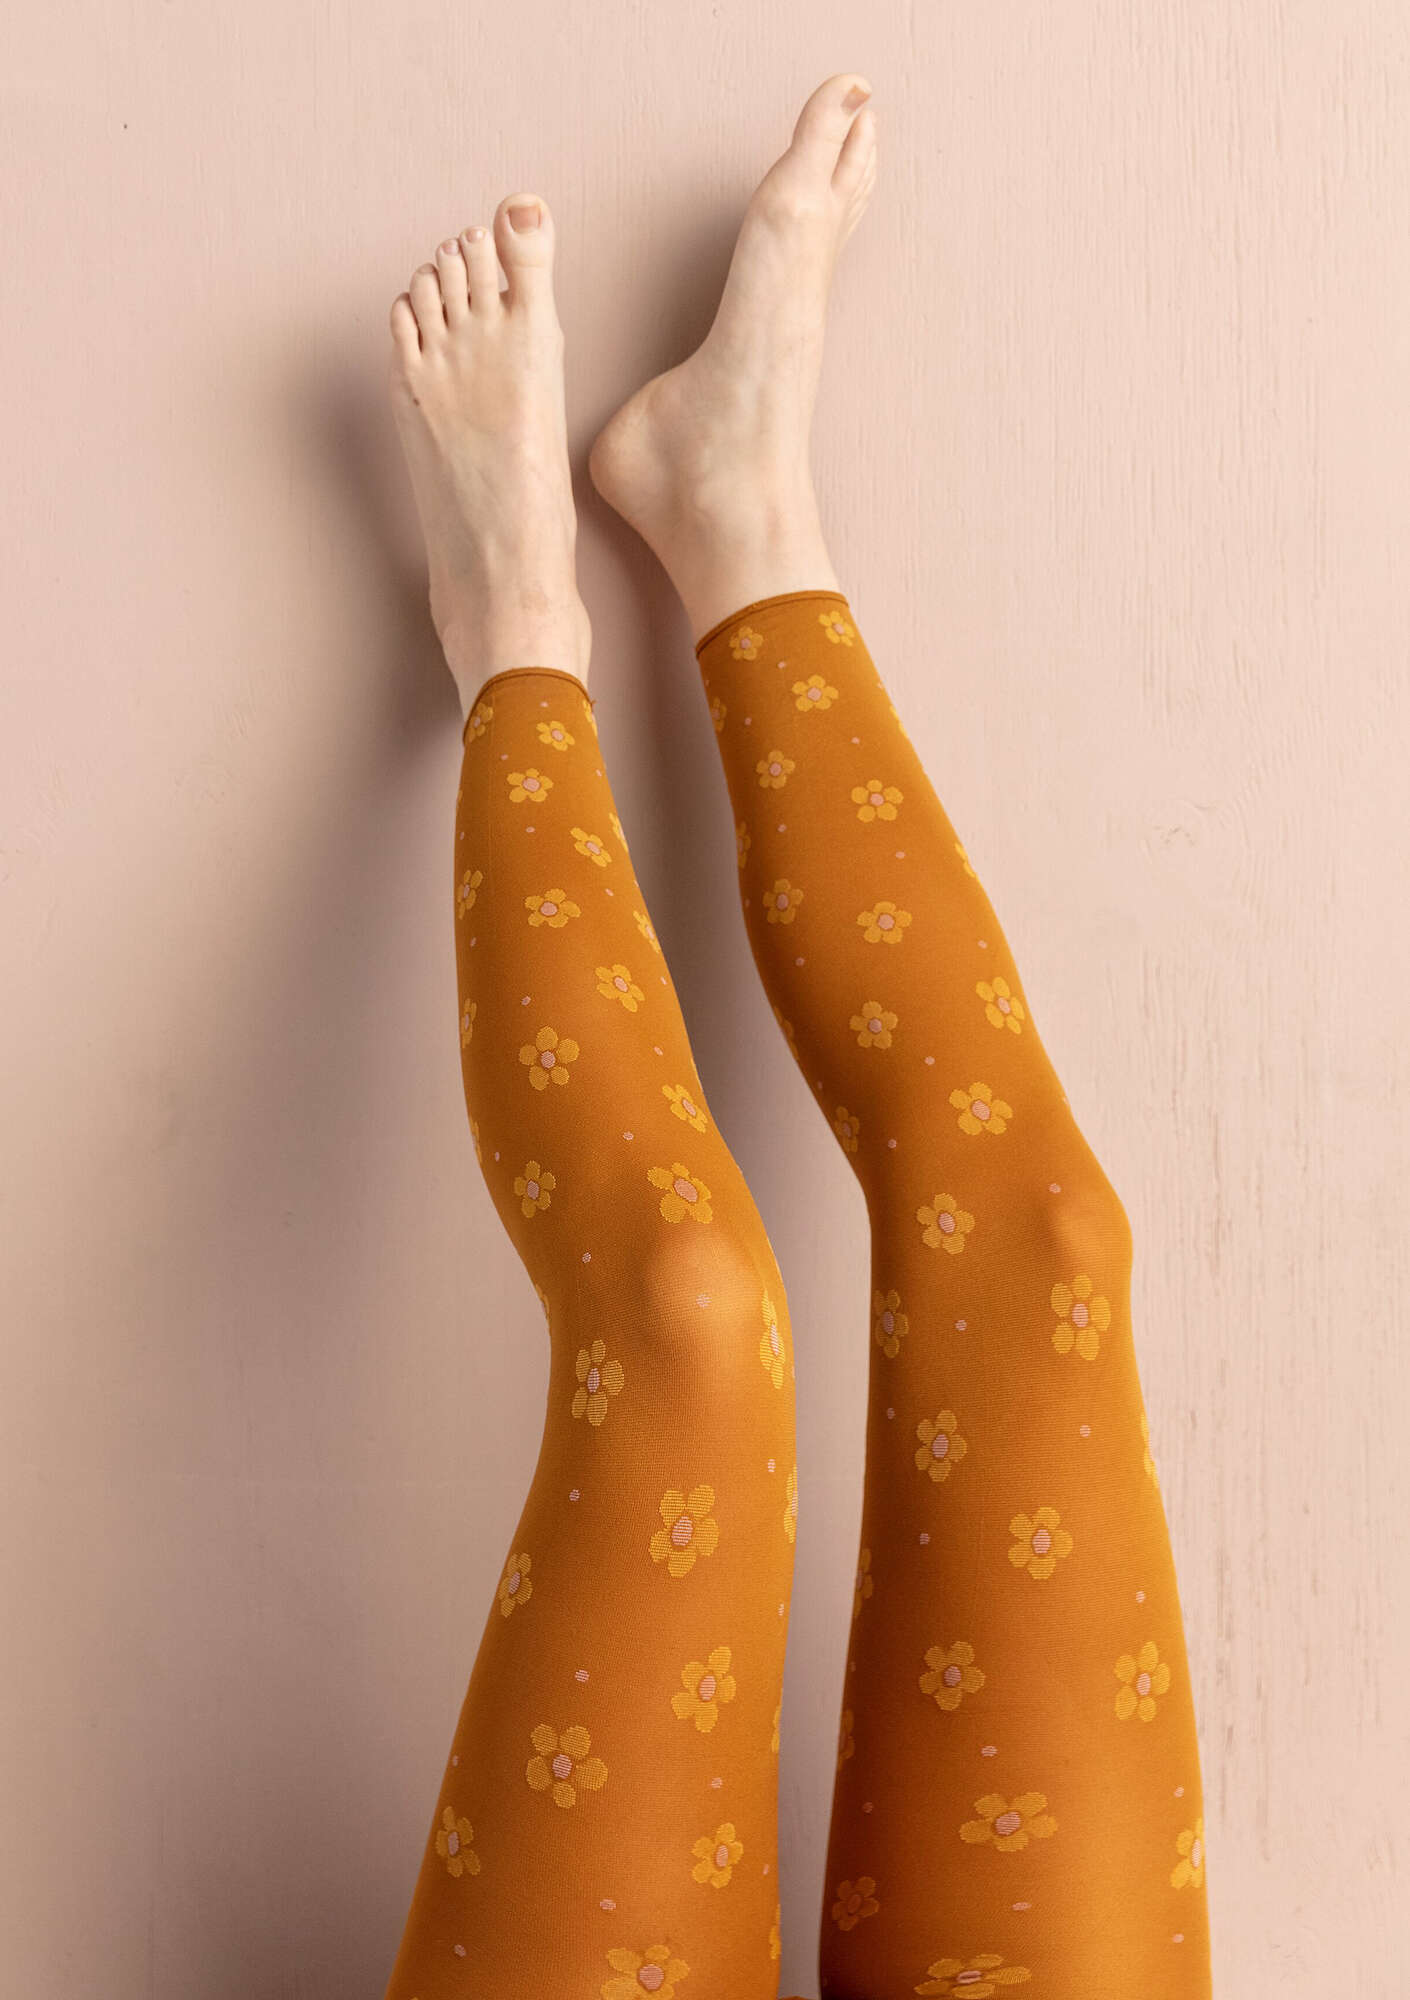 “Belle” jacquard-patterned leggings in recycled nylon curry